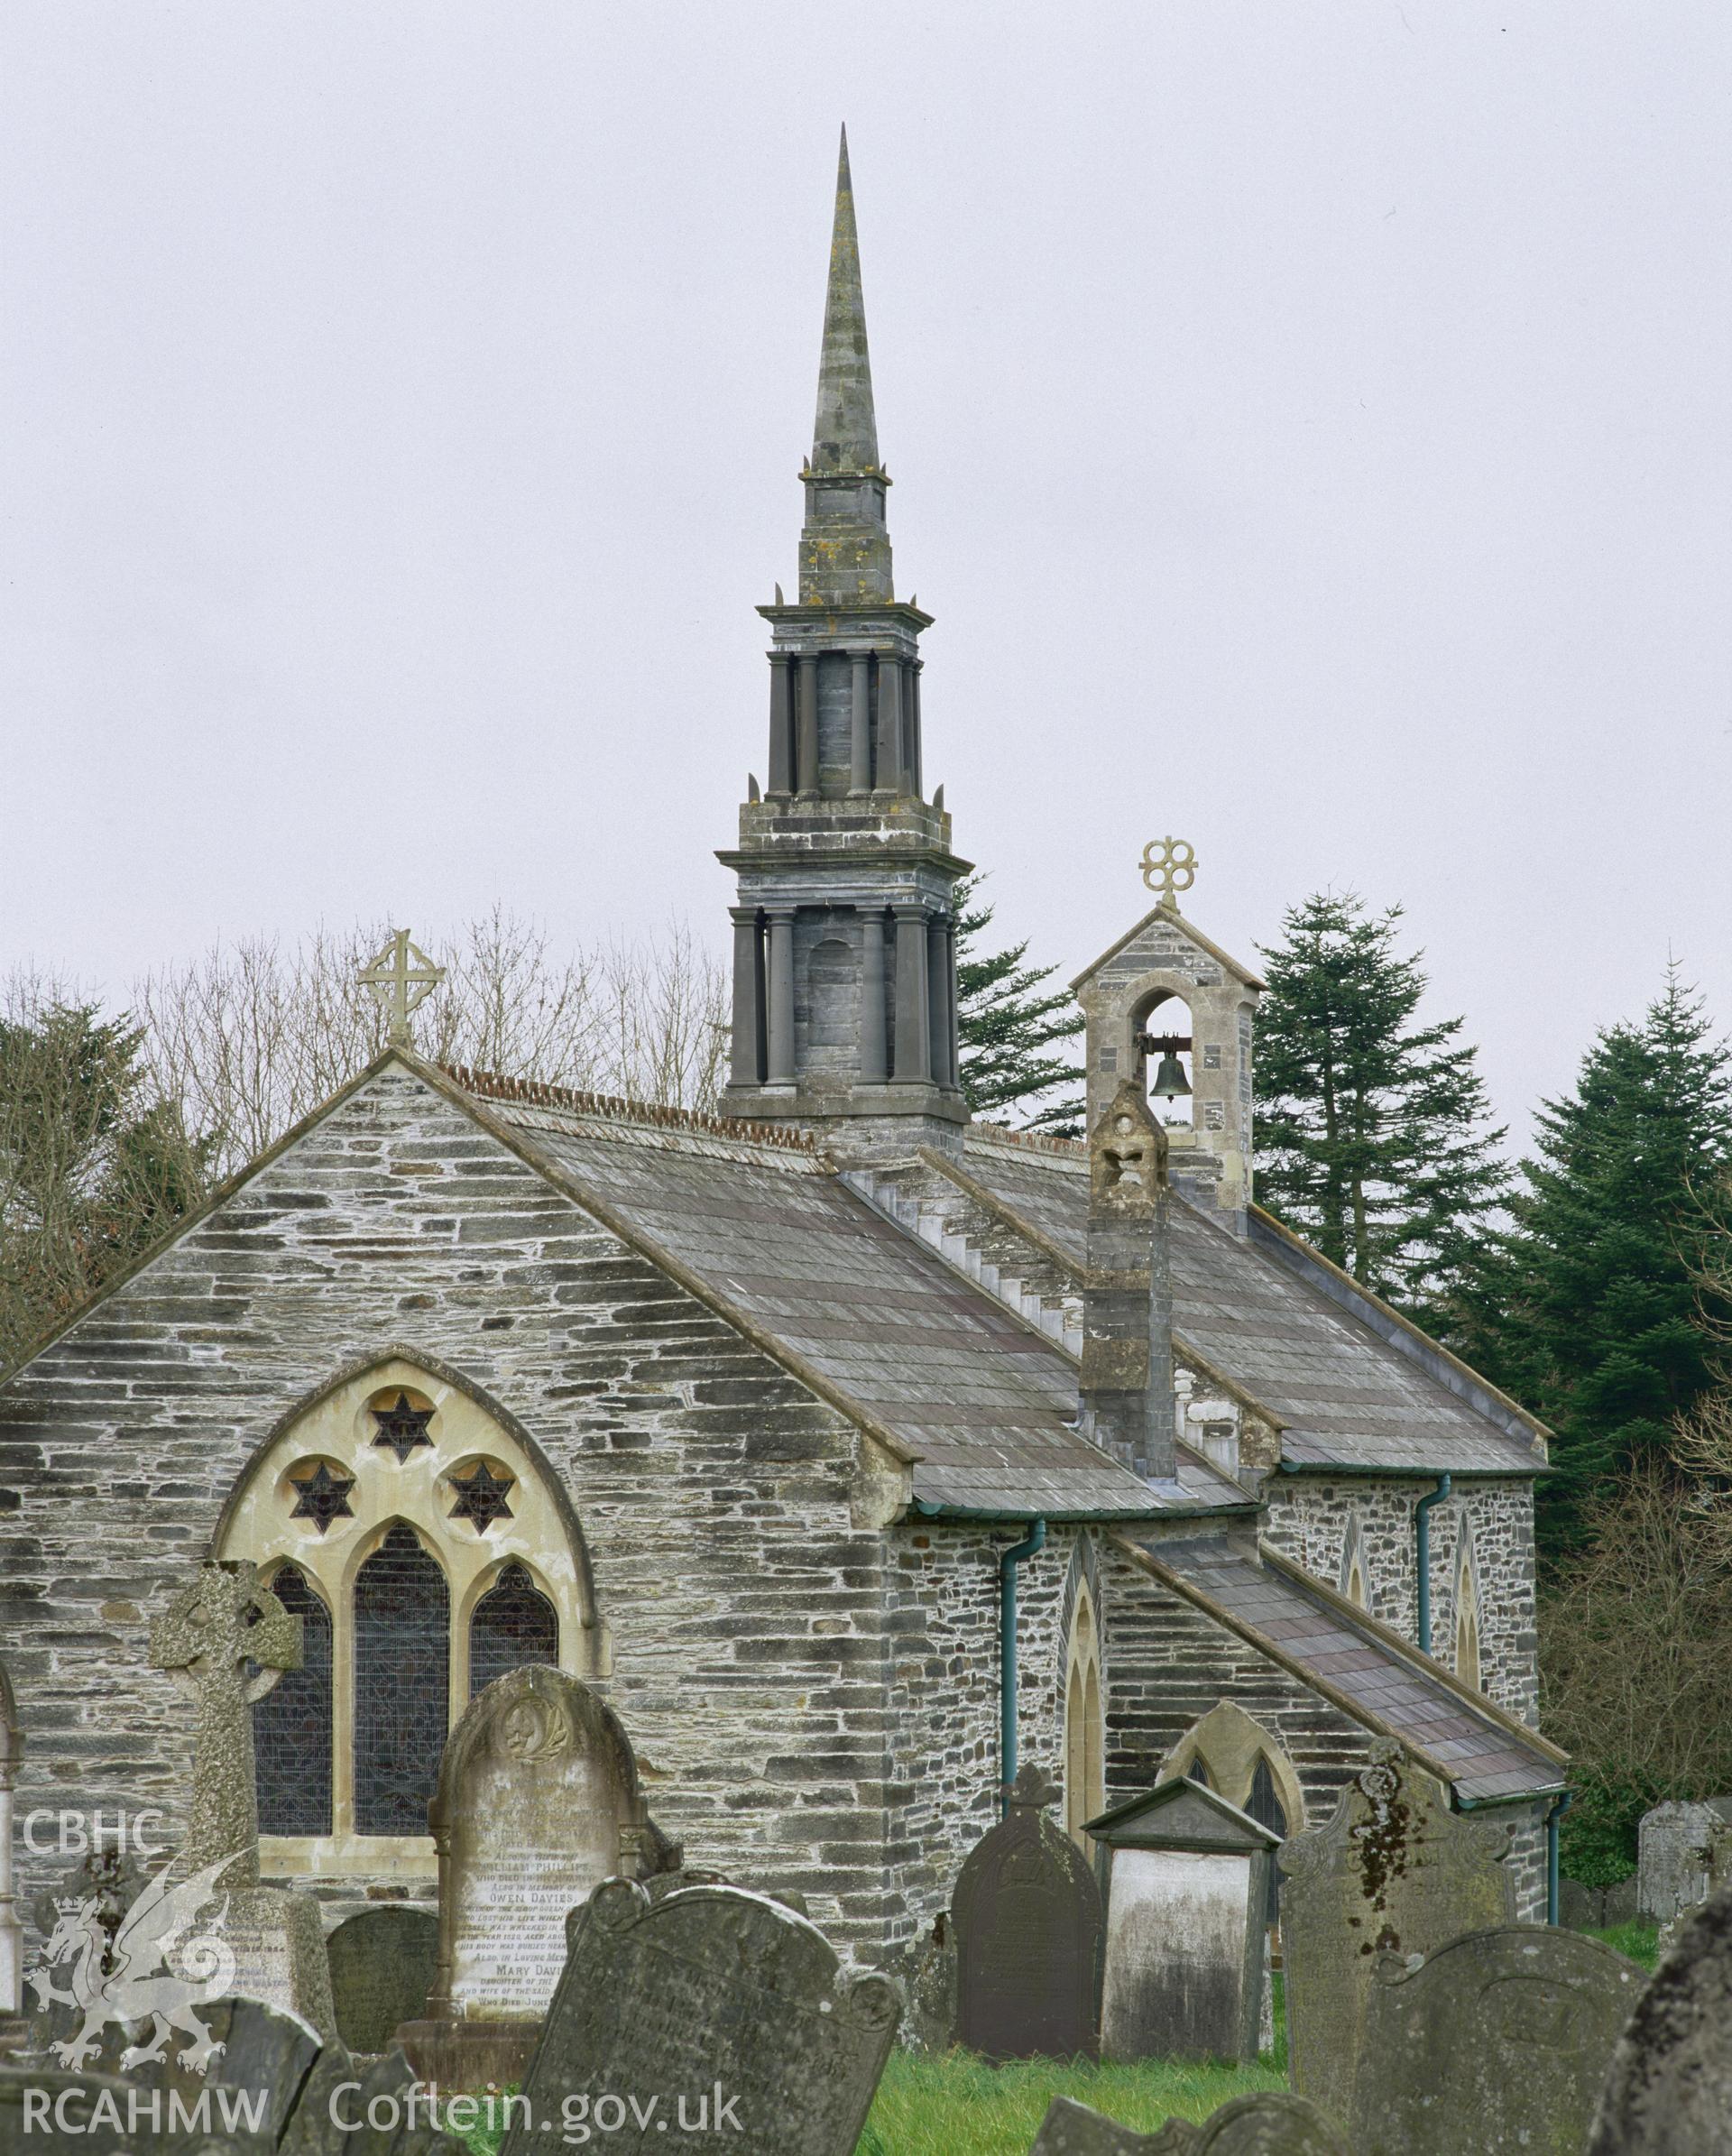 Colour transparency showing an exterior  view of St Cynllo's Church, Llangoedmor, produced by Iain Wright, June 2004.